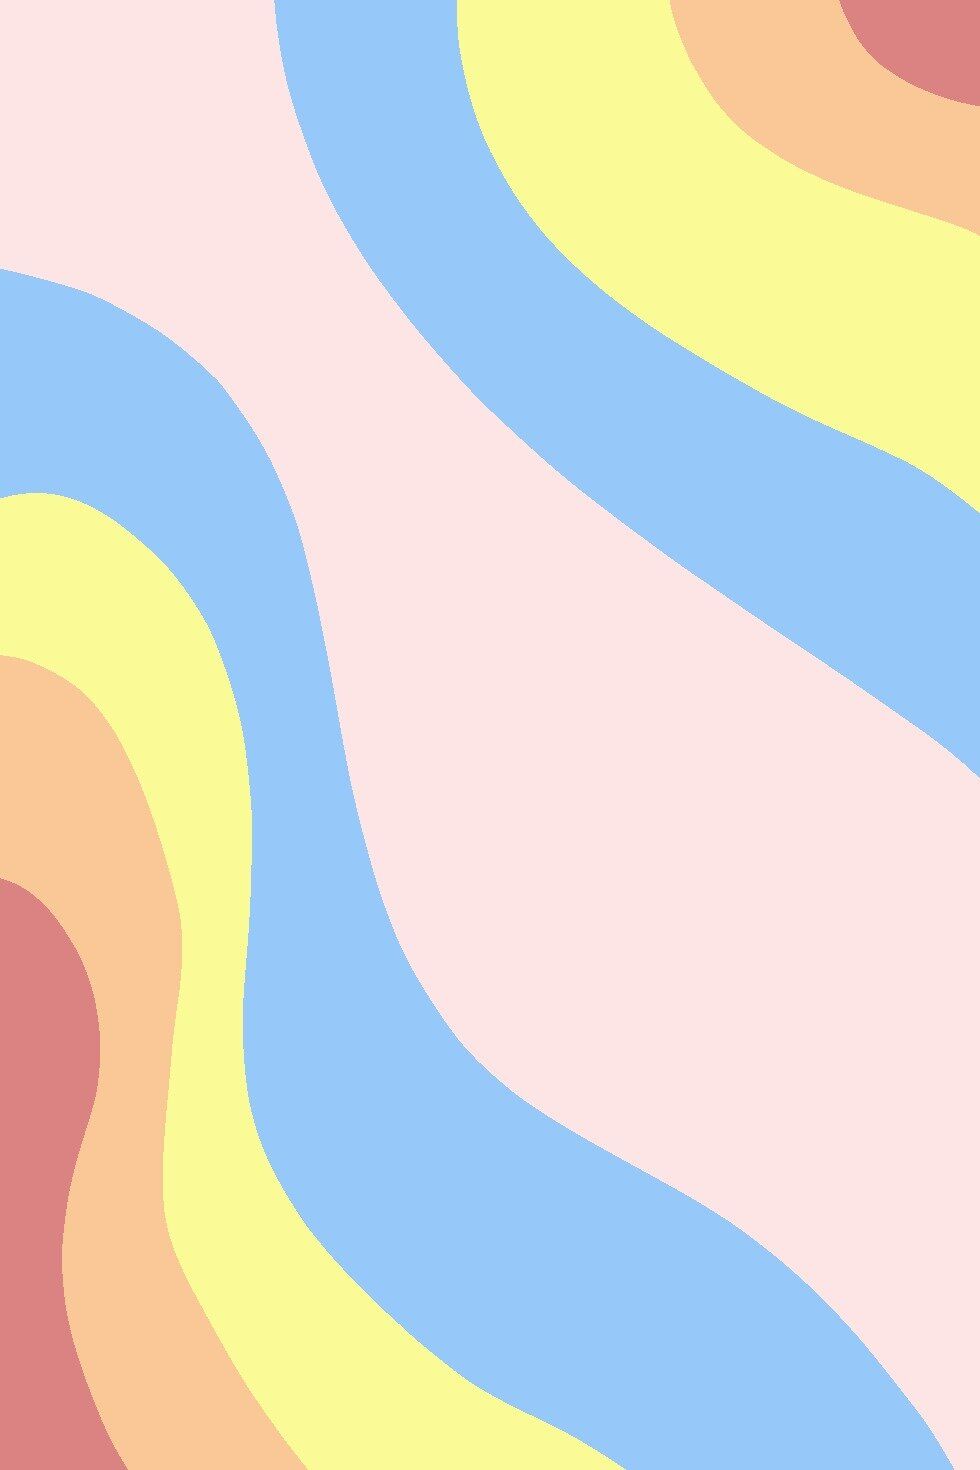 An abstract image of wavy lines in pastel colors - Non binary